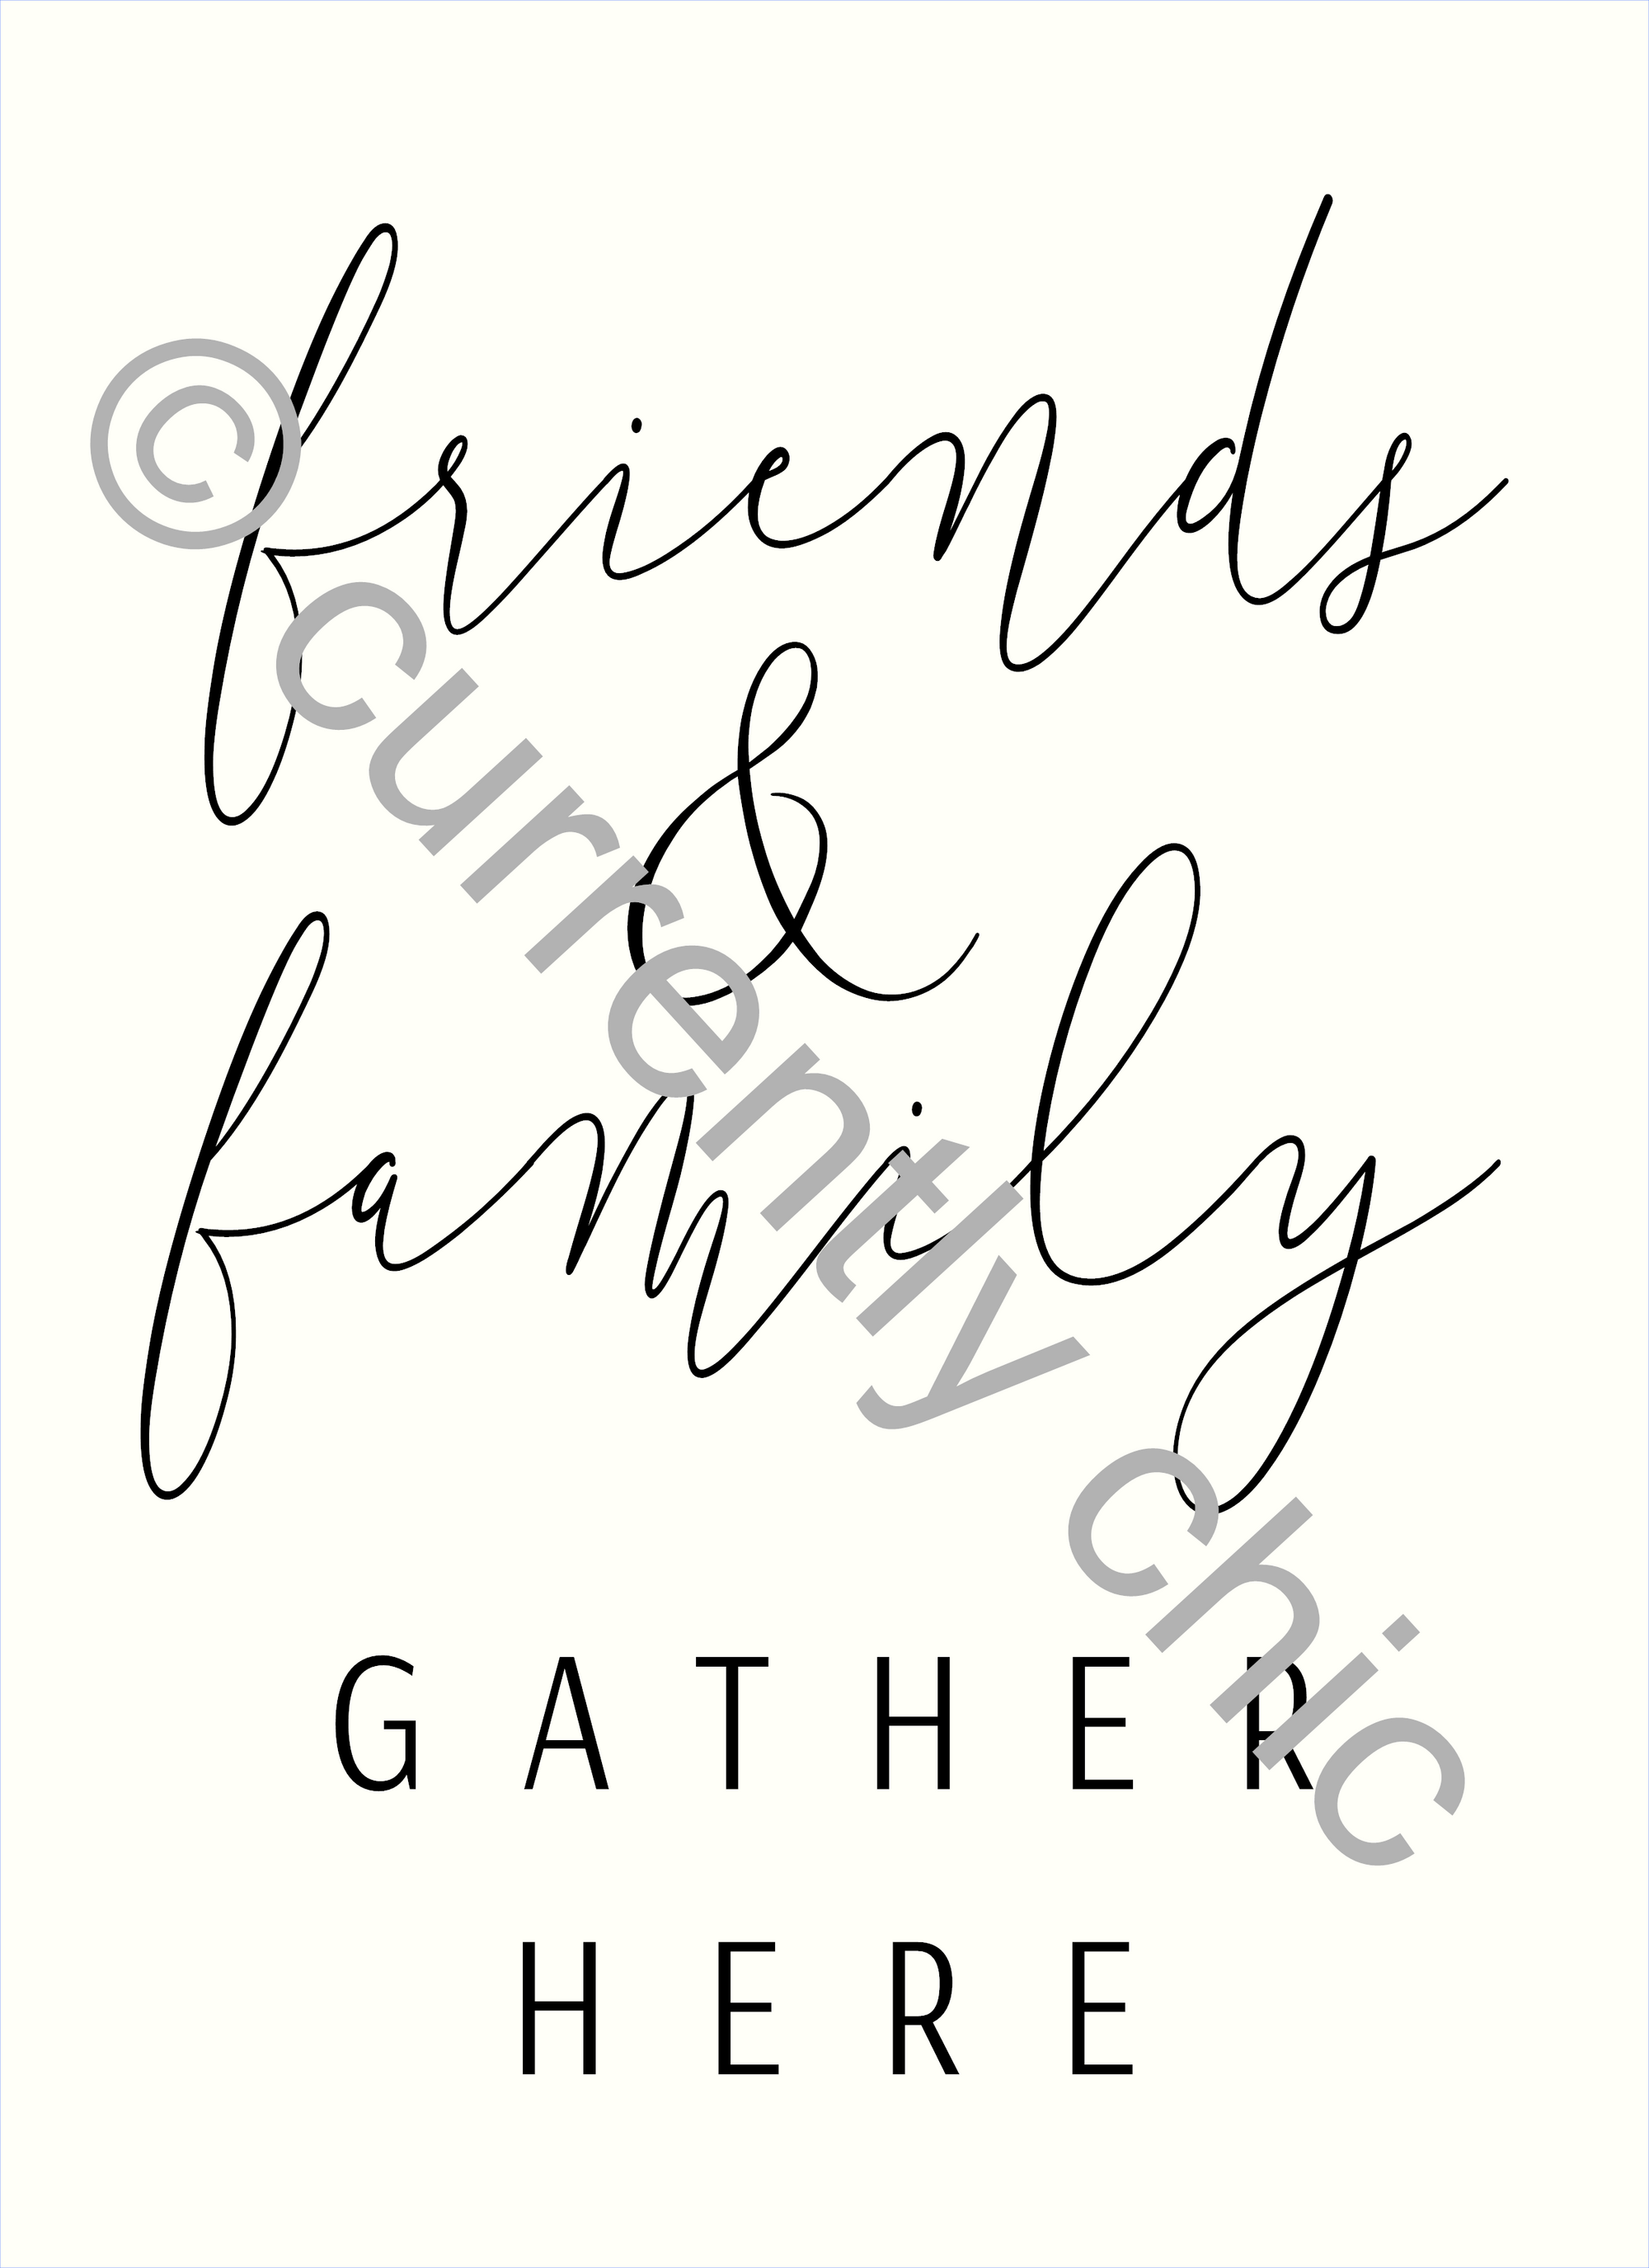 Friends And Family Gather Here Sign